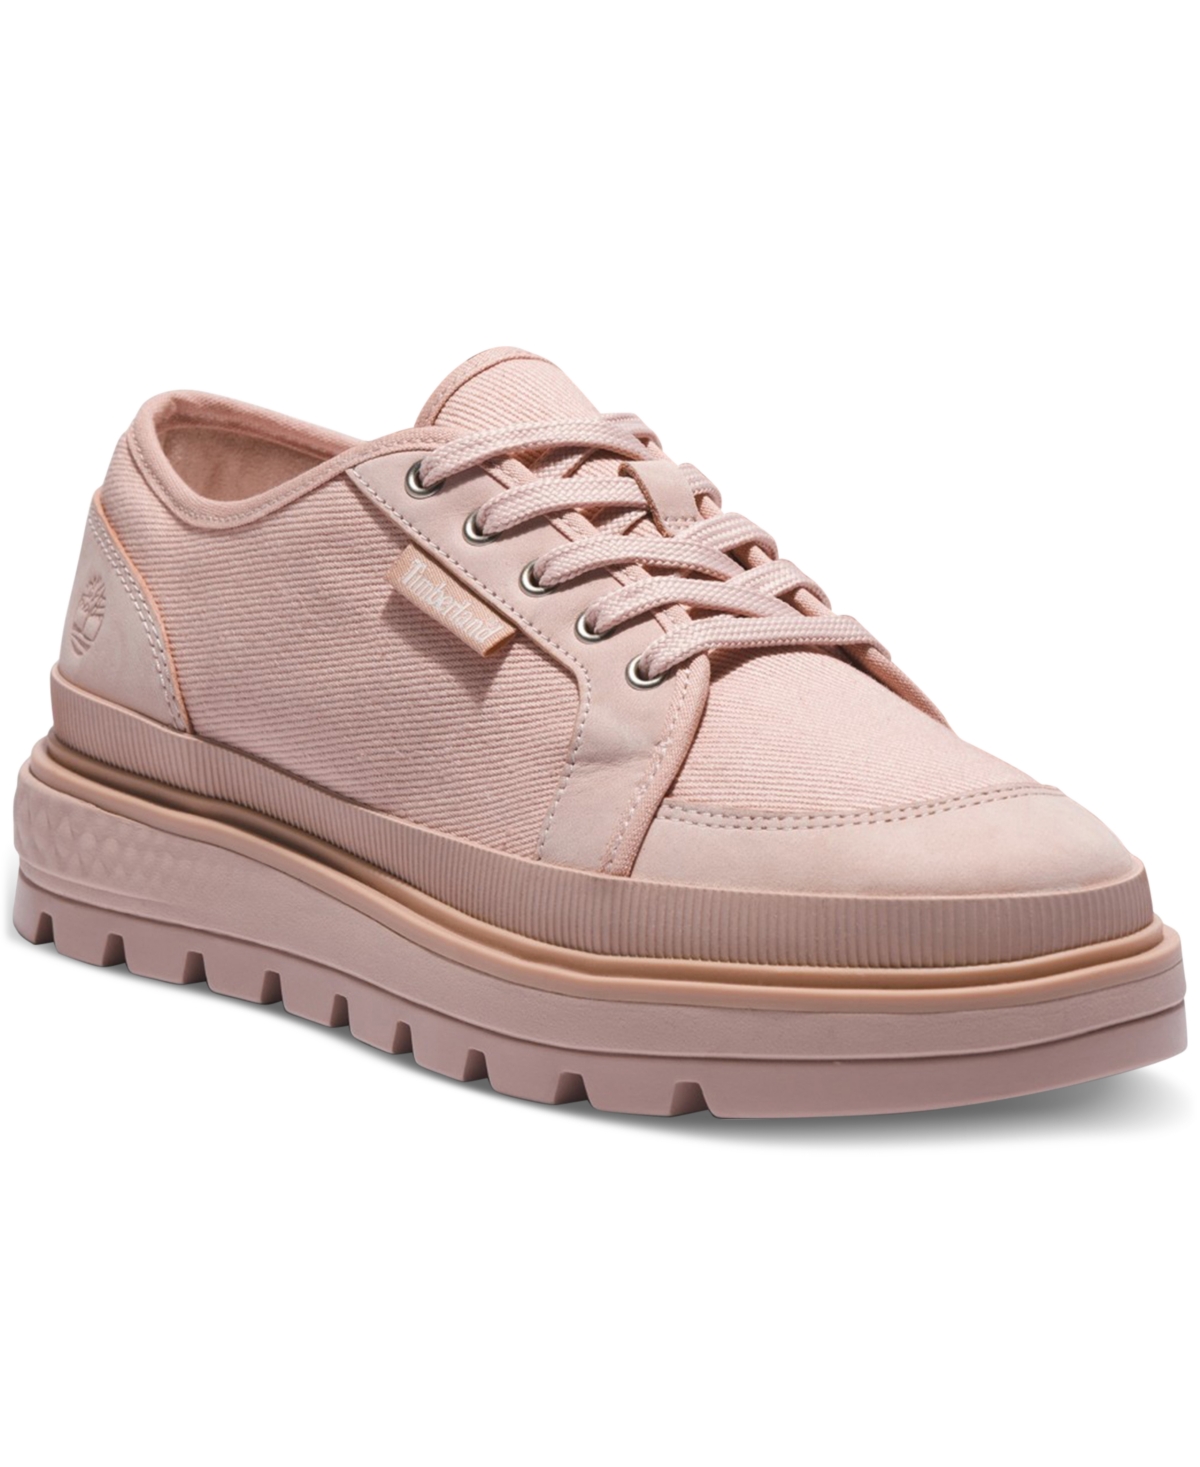 TIMBERLAND WOMEN'S RAY CITY MIXED MATERIAL SNEAKERS WOMEN'S SHOES